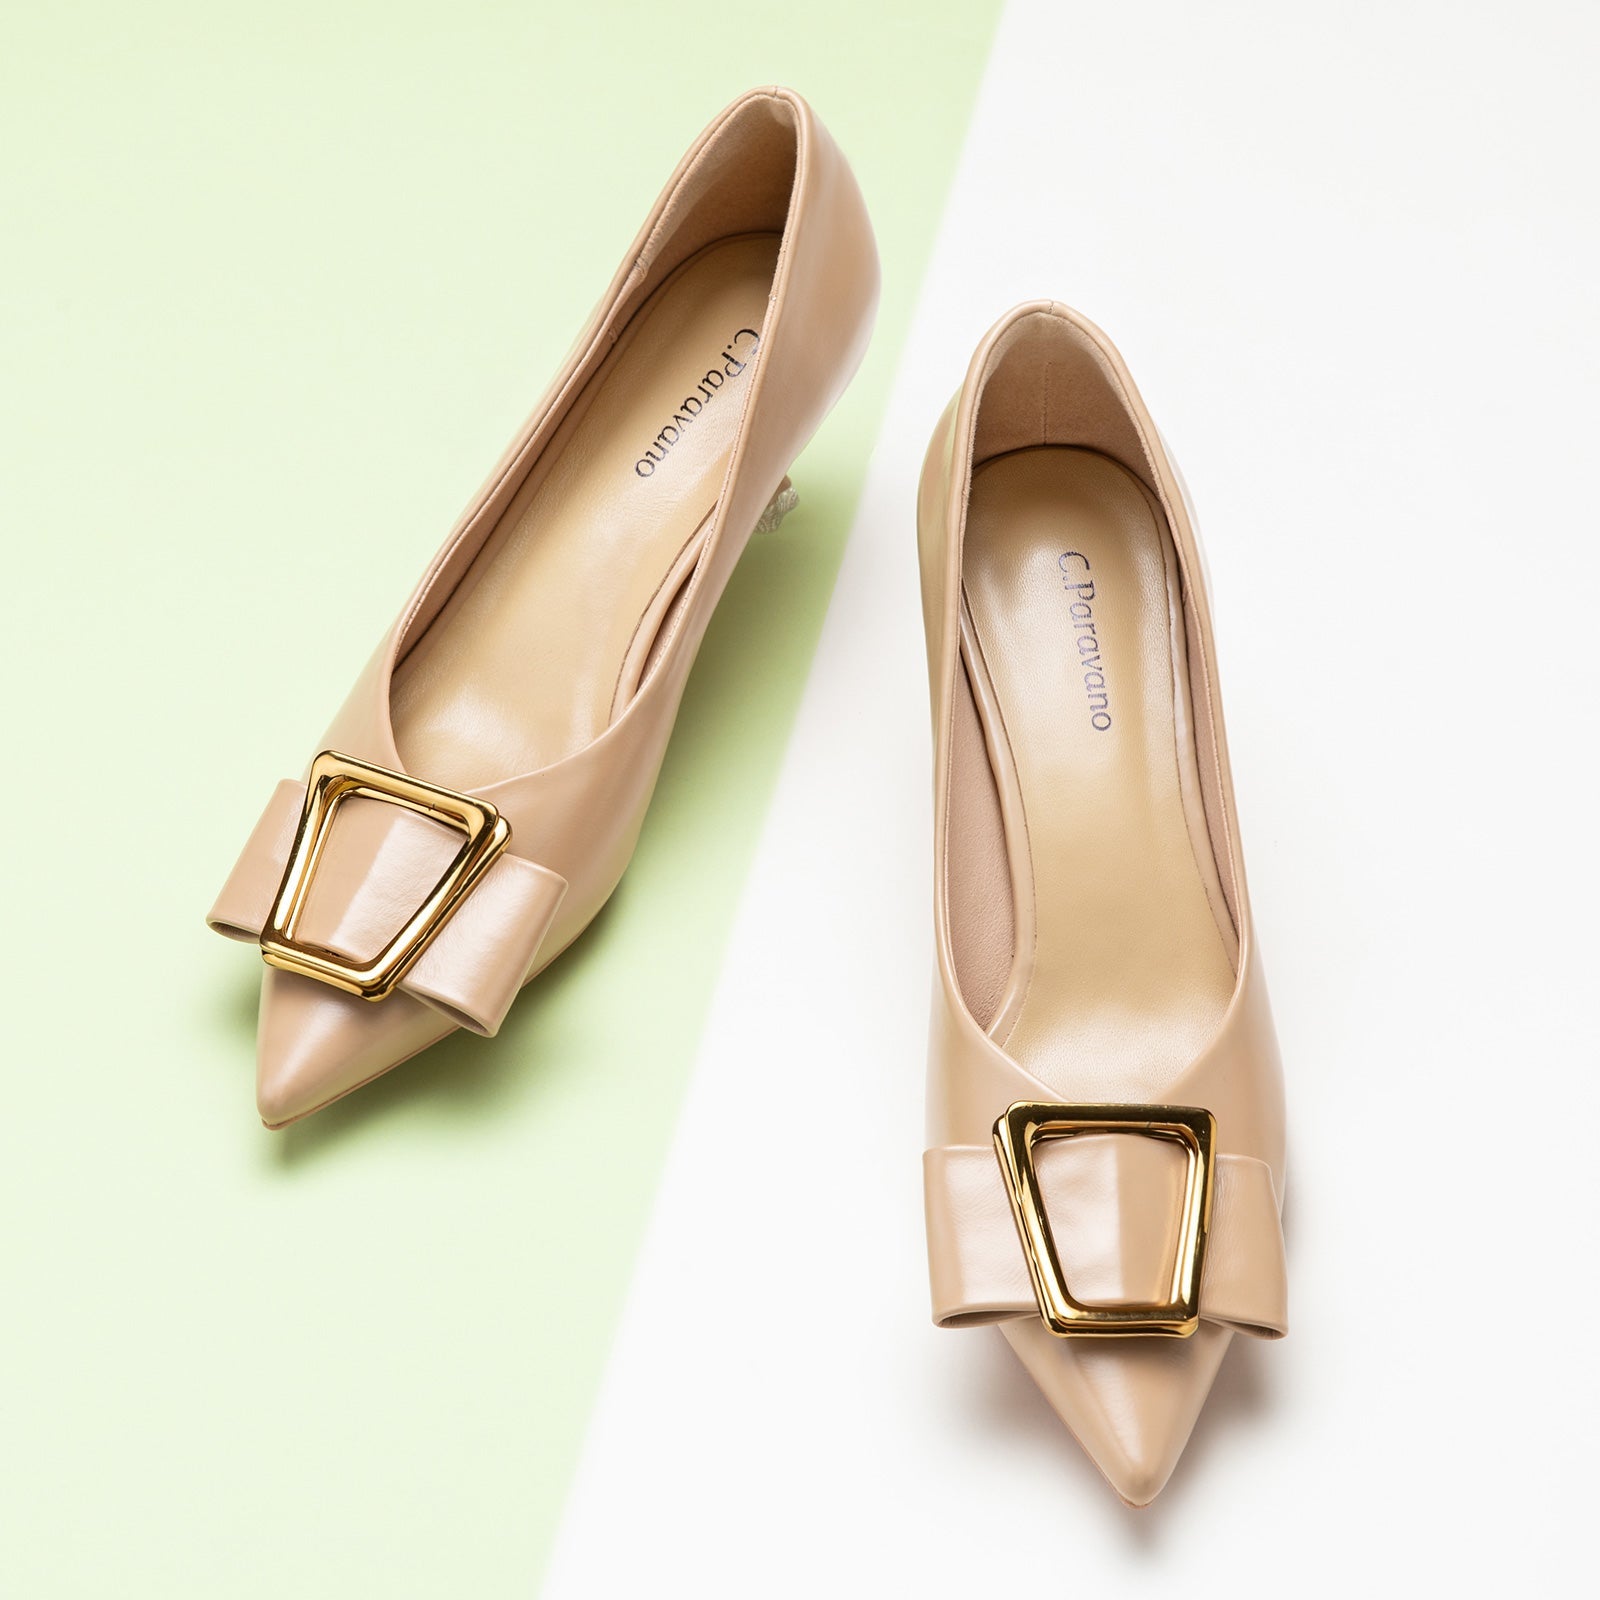 Beige Geometric Kitten Heel Women Pumps, a versatile and sophisticated choice for everyday elegance